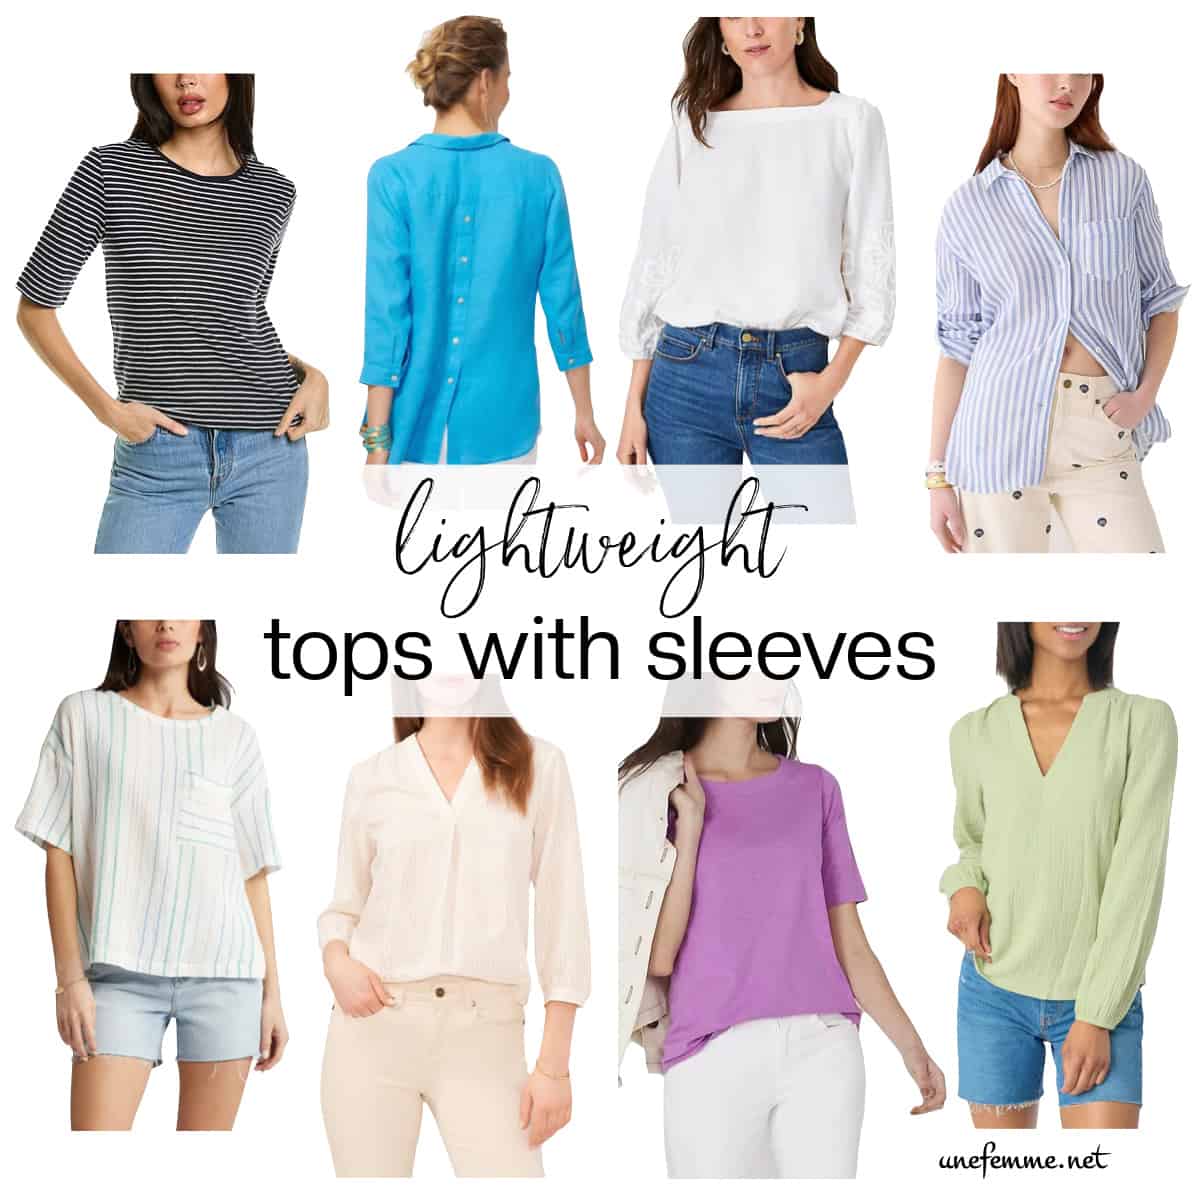 Because we love lightweight tops with sleeves…